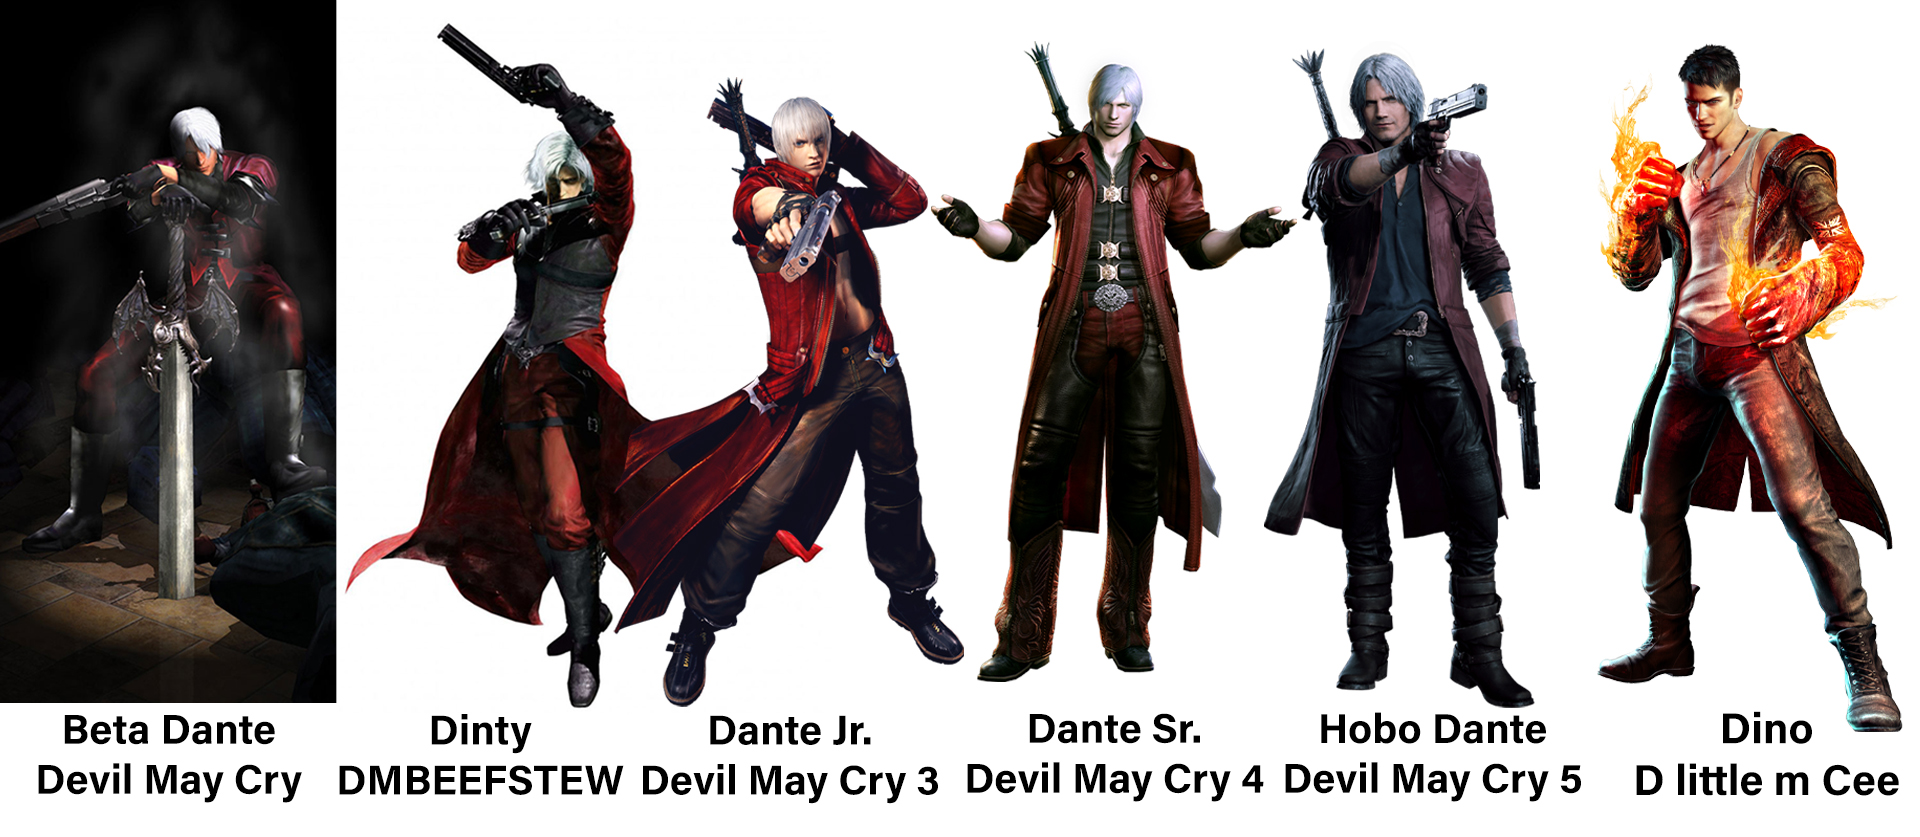 Devil may cry 3 can find steam фото 86